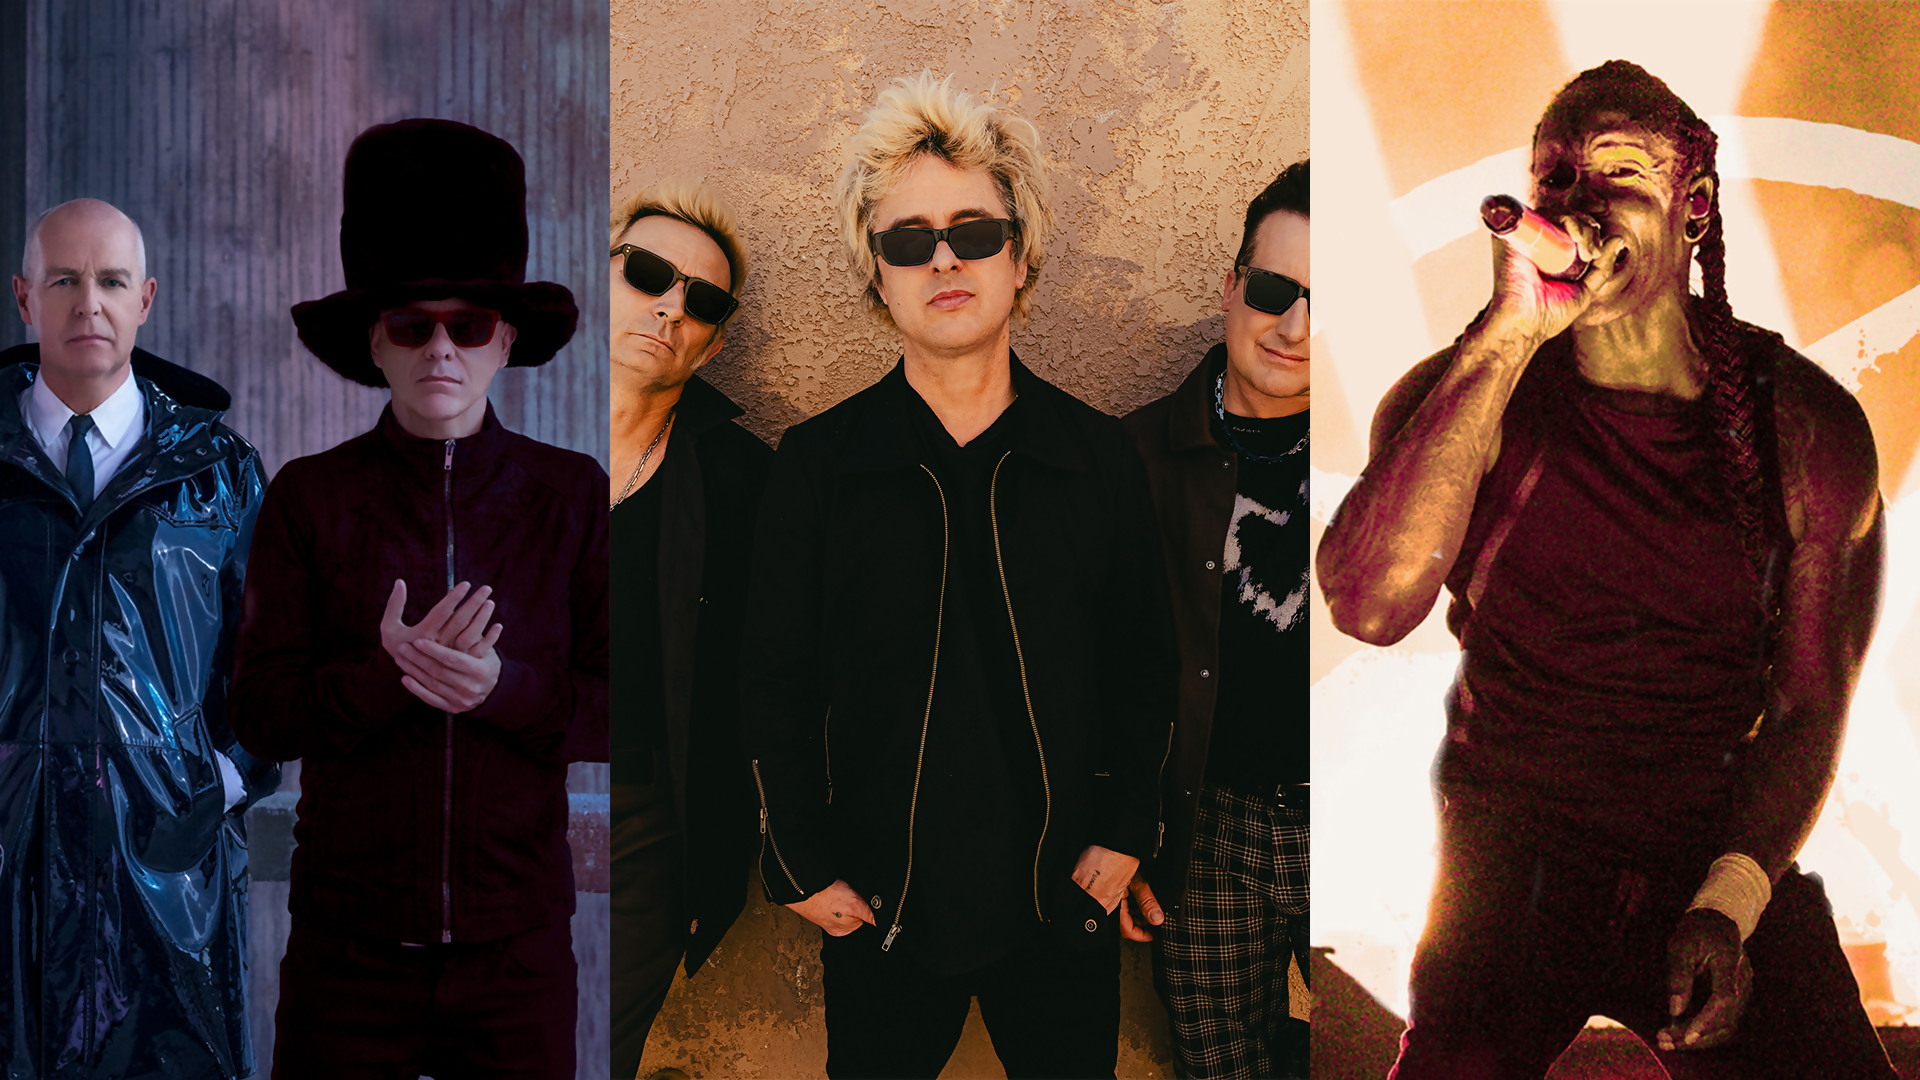 Green Day, The Prodigy and Pet Shop Boys to headline Isle of Wight